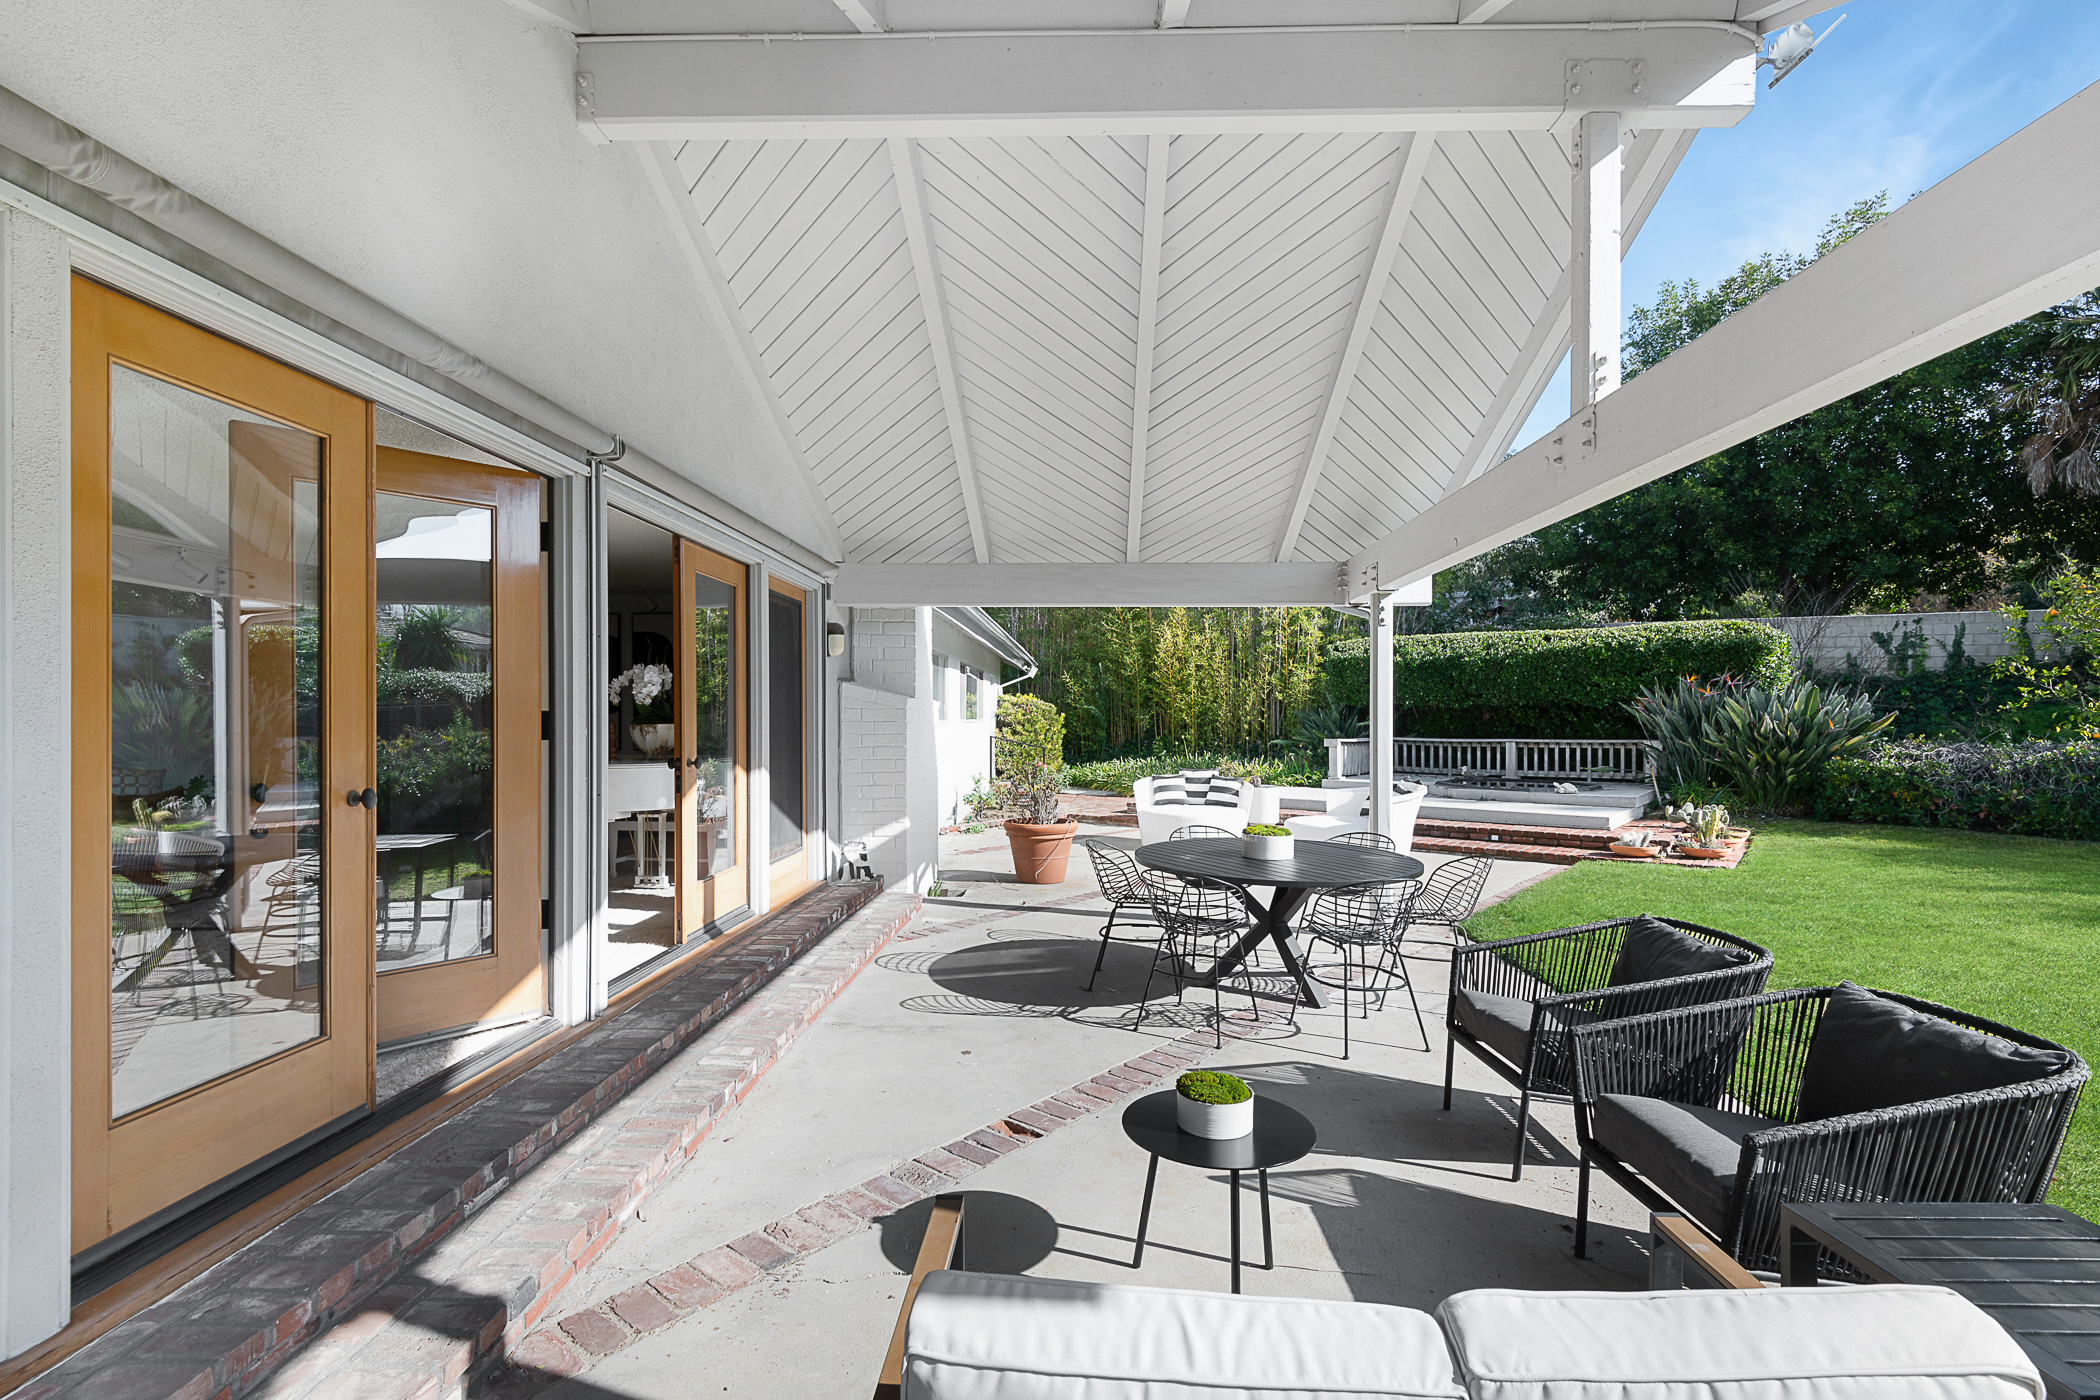 Chevron patterned white roof over patio space at the back of the house